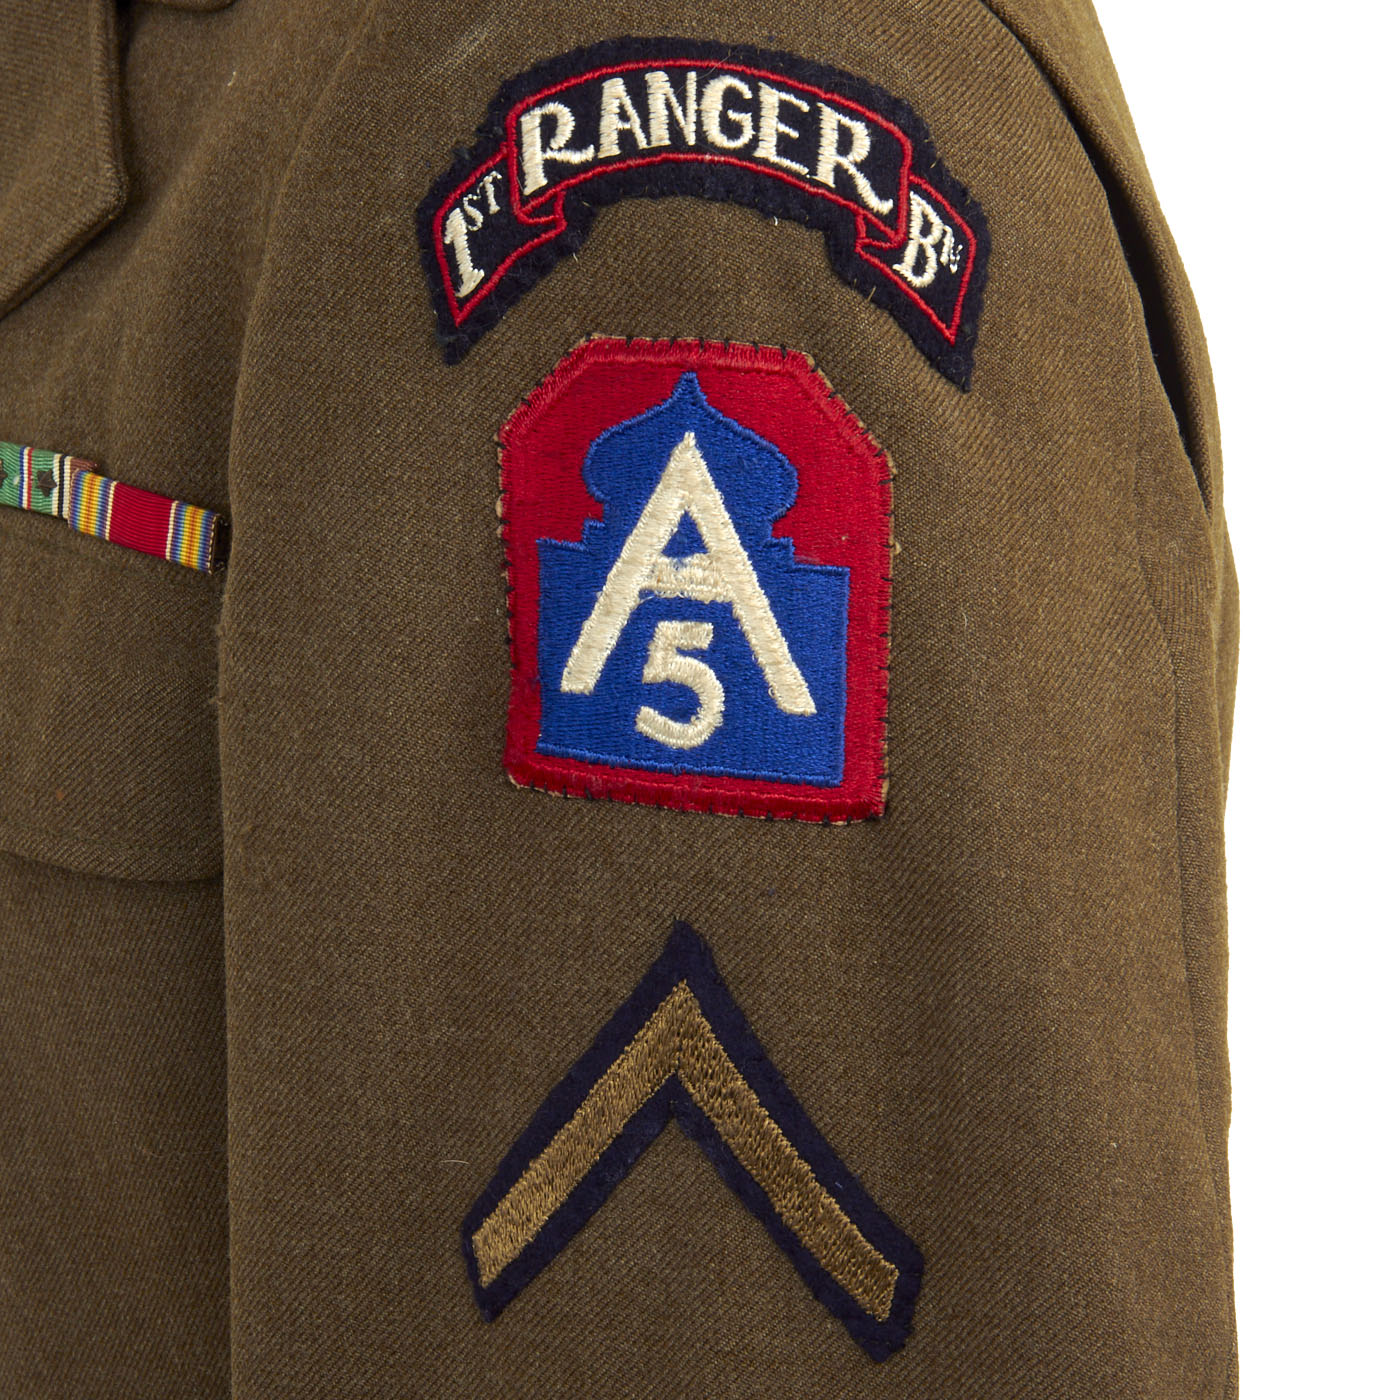 Piecing together the possible sponsor patches for Rangers uniforms